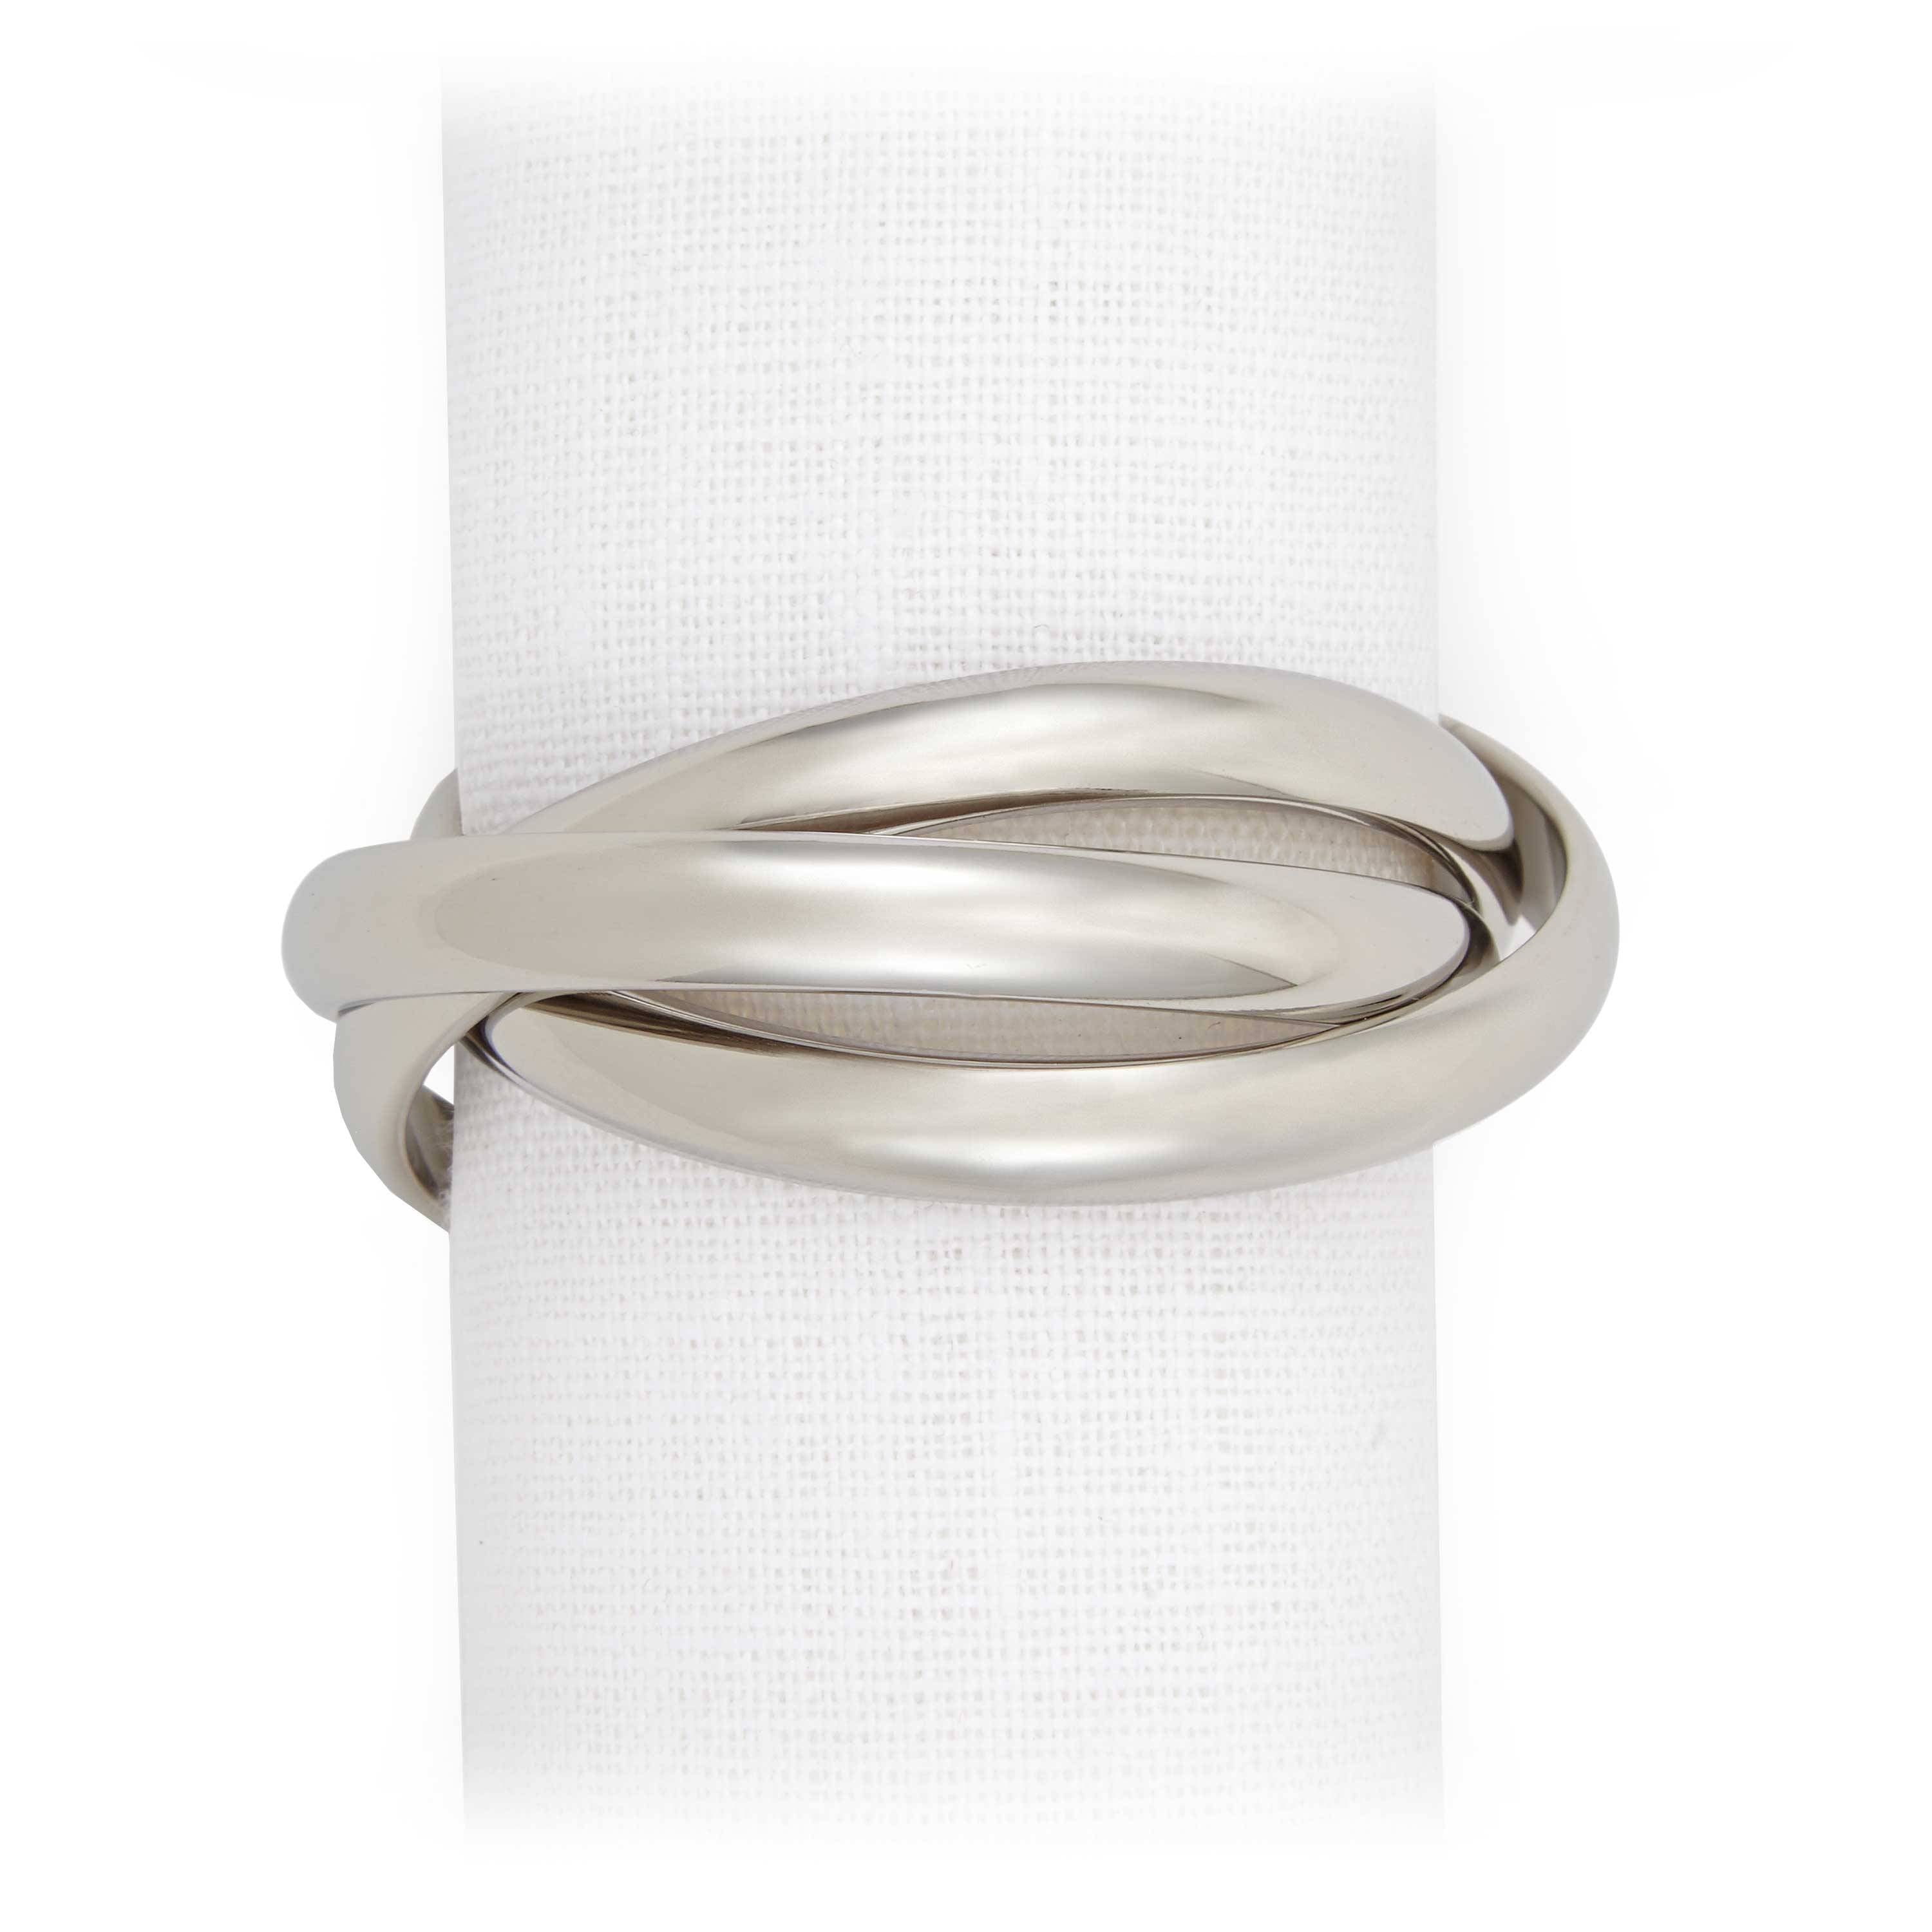 Chain Link Napkin Ring, Set of 4 - Jung Lee NY